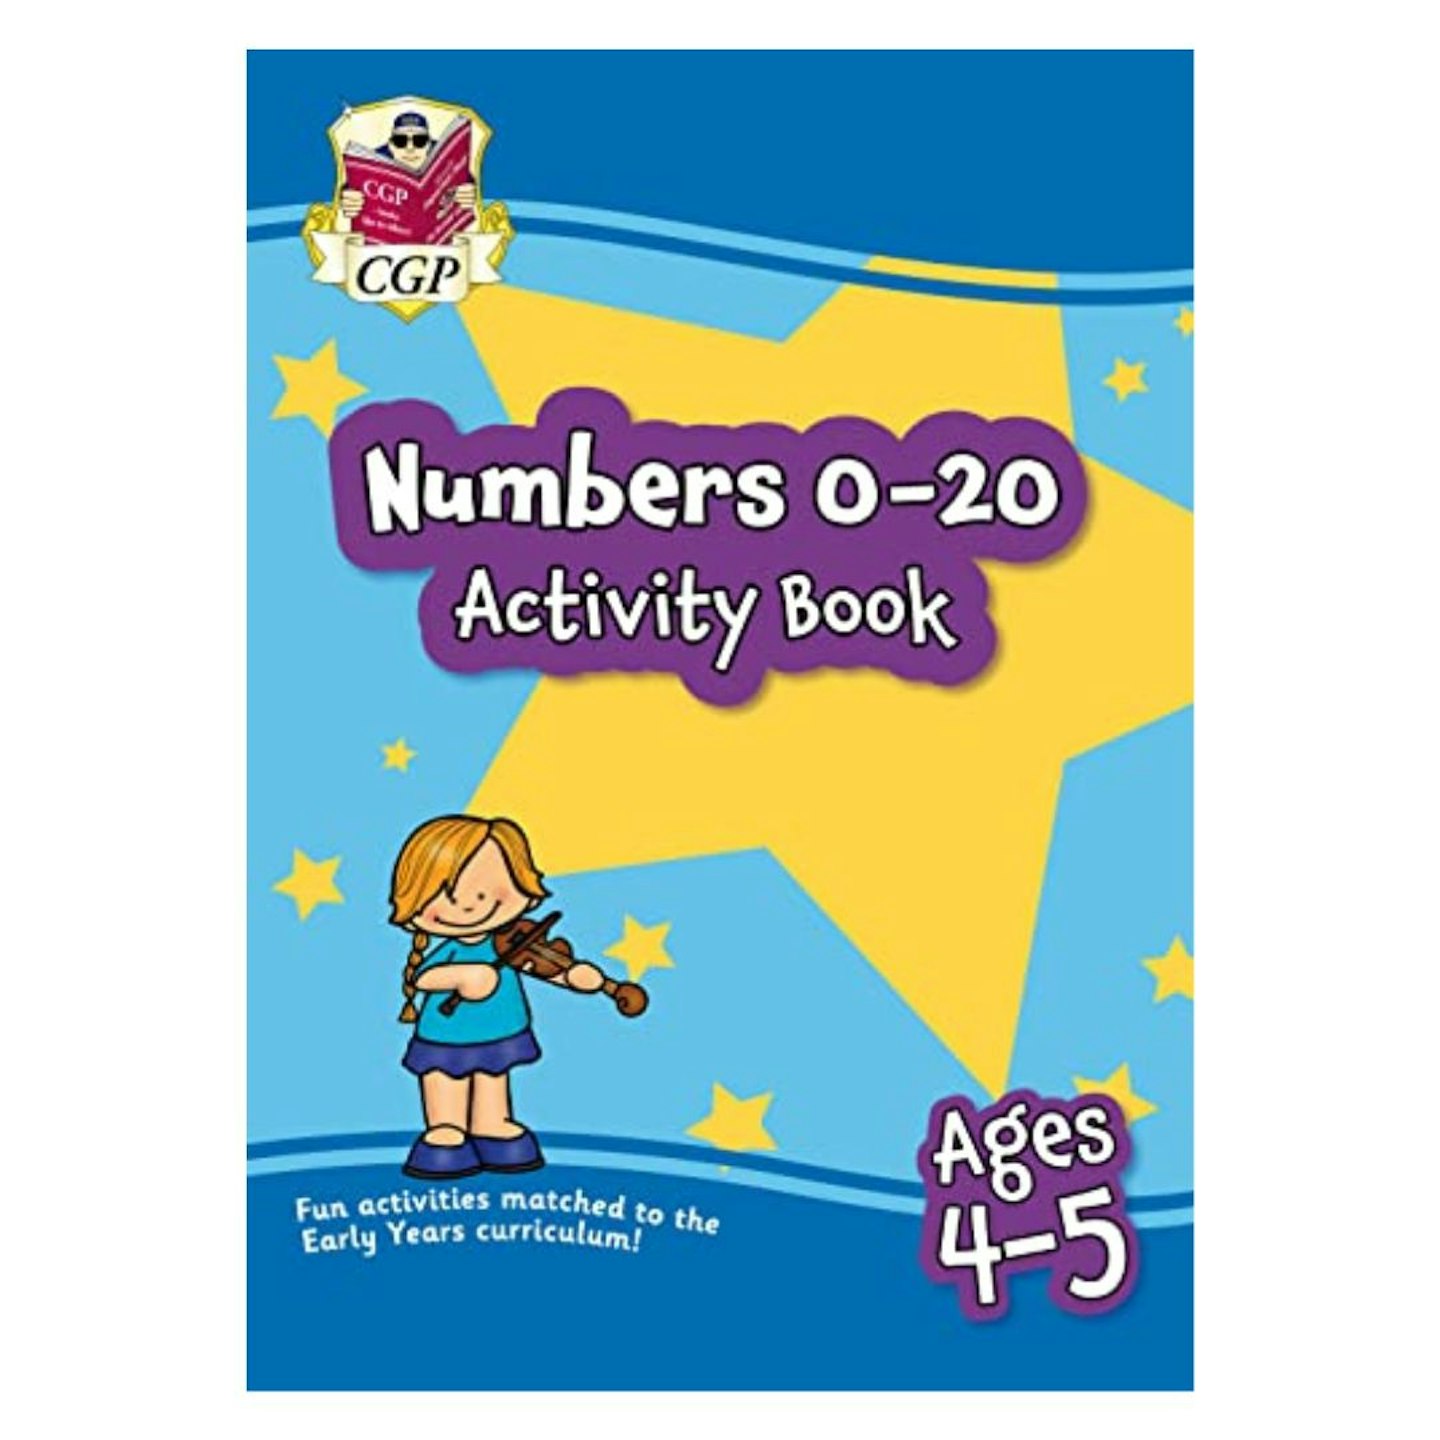 New Numbers 0-20 Activity Book for Ages 4-5